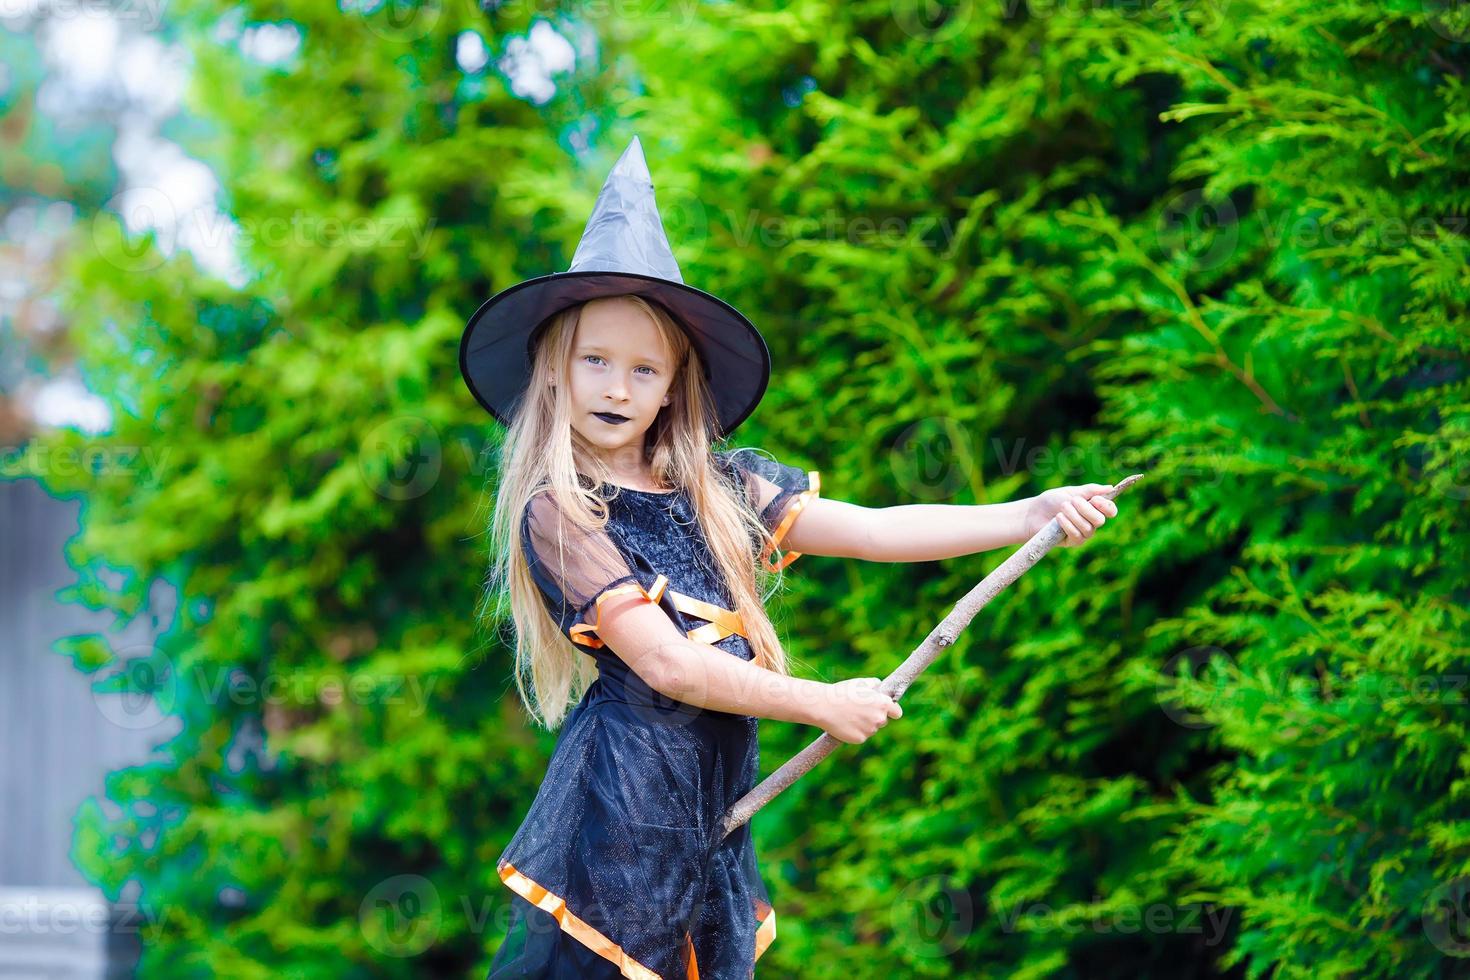 Adorable little girl wearing witch costume with broom on Halloween outdoors photo